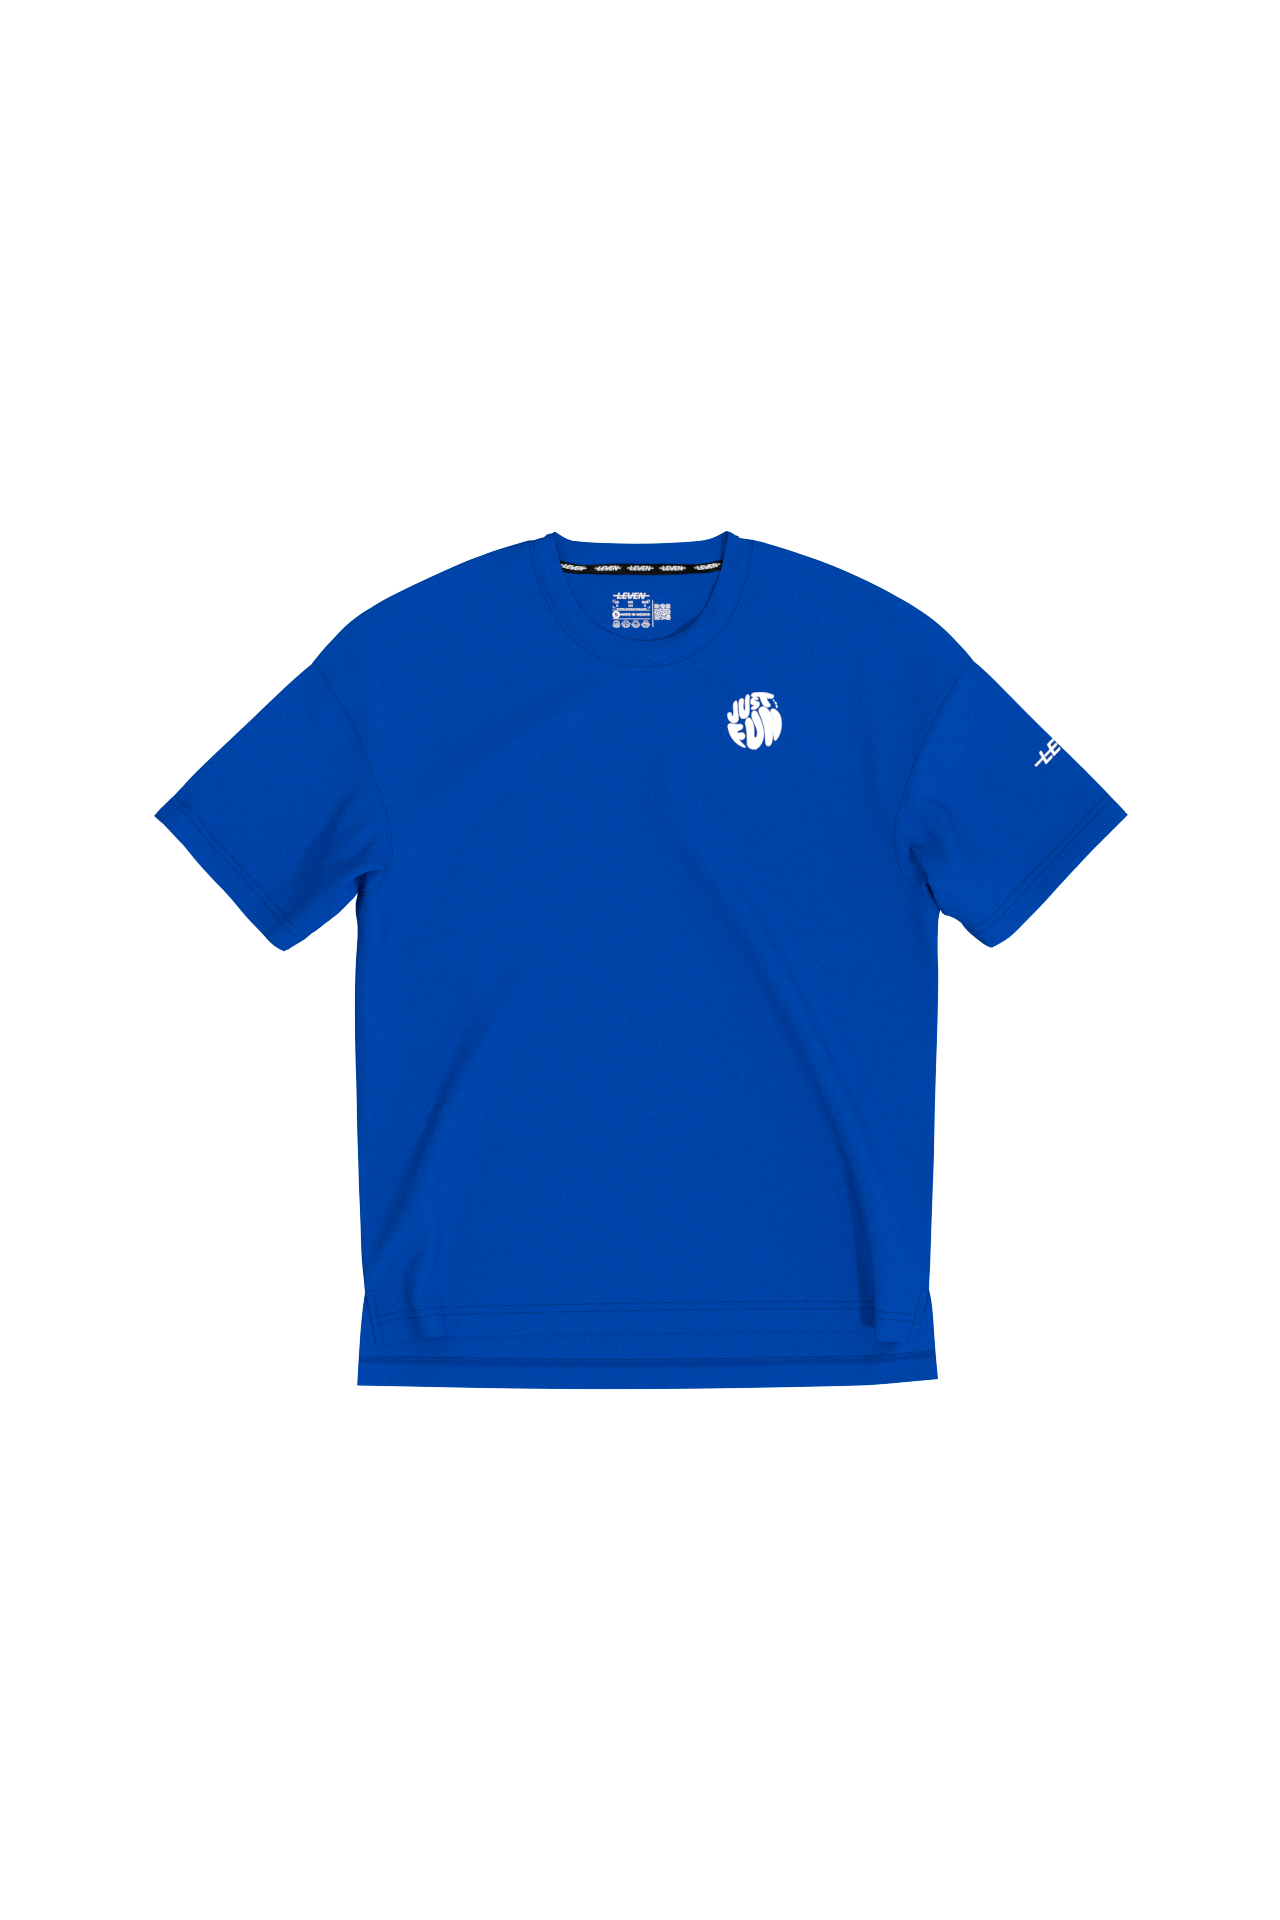 Just For Fun Acid Blue Tee